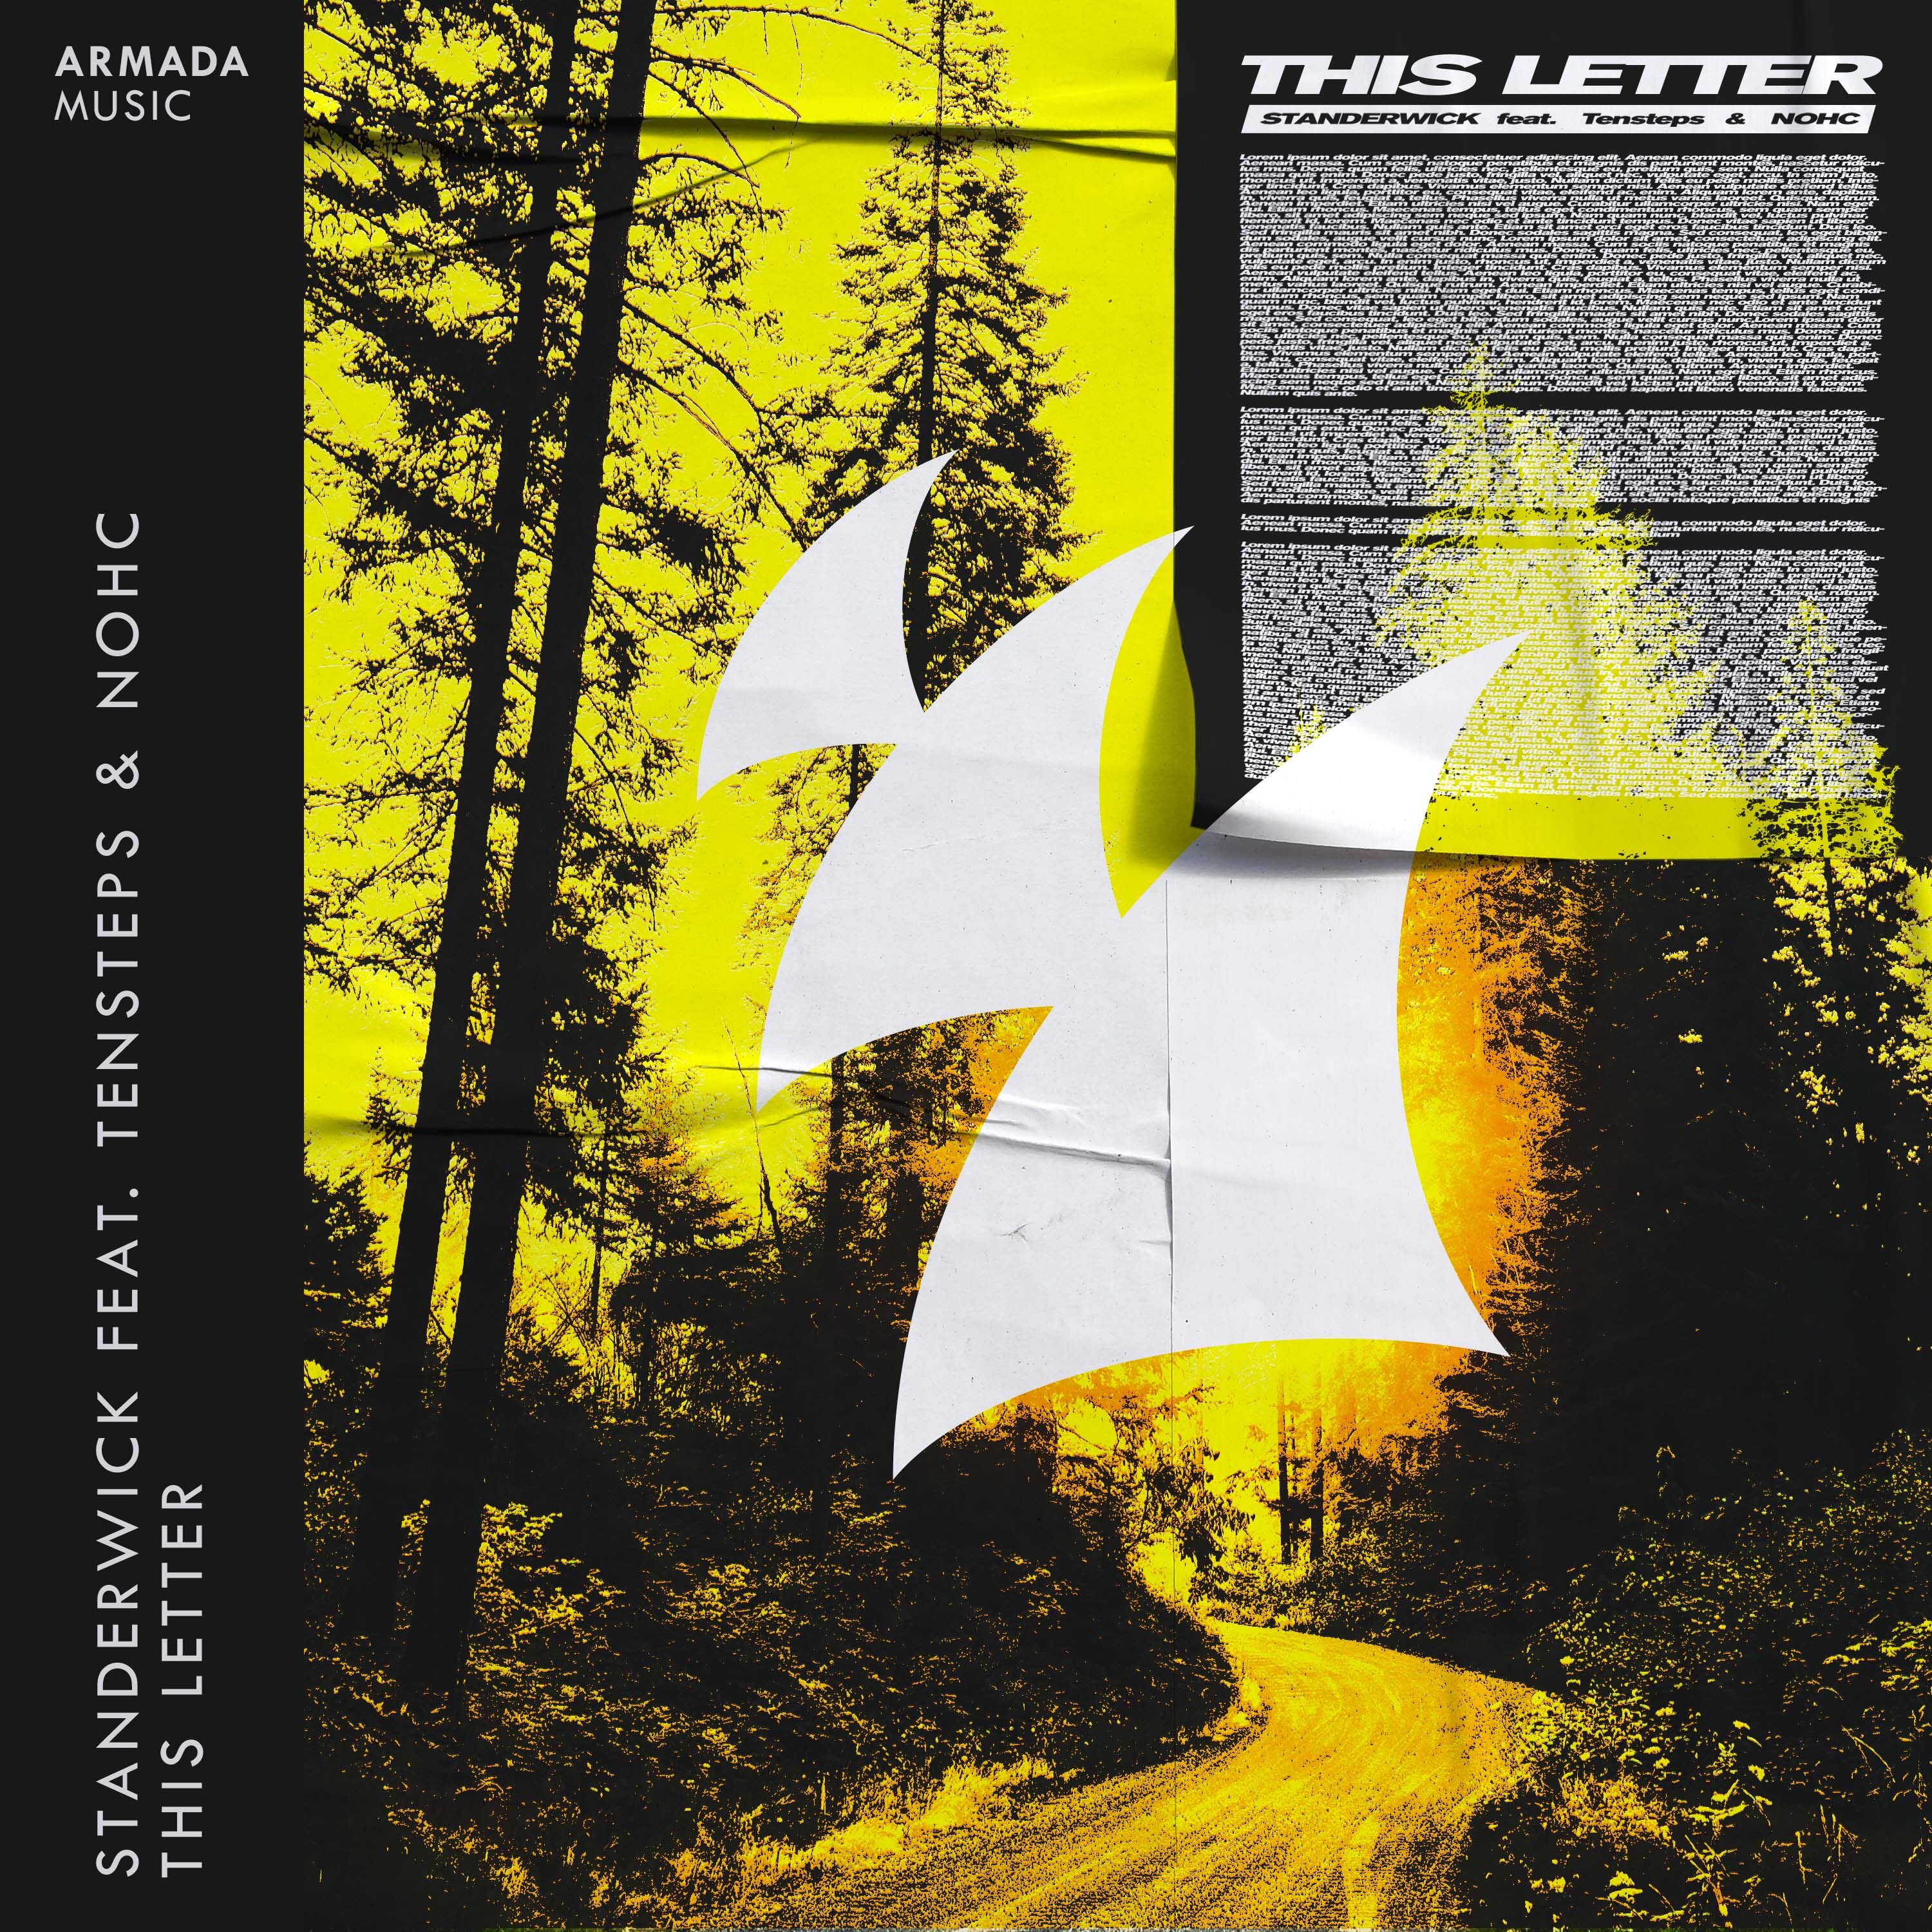 STANDERWICK feat. Tensteps and NOHC presents This Letter on Armada Music